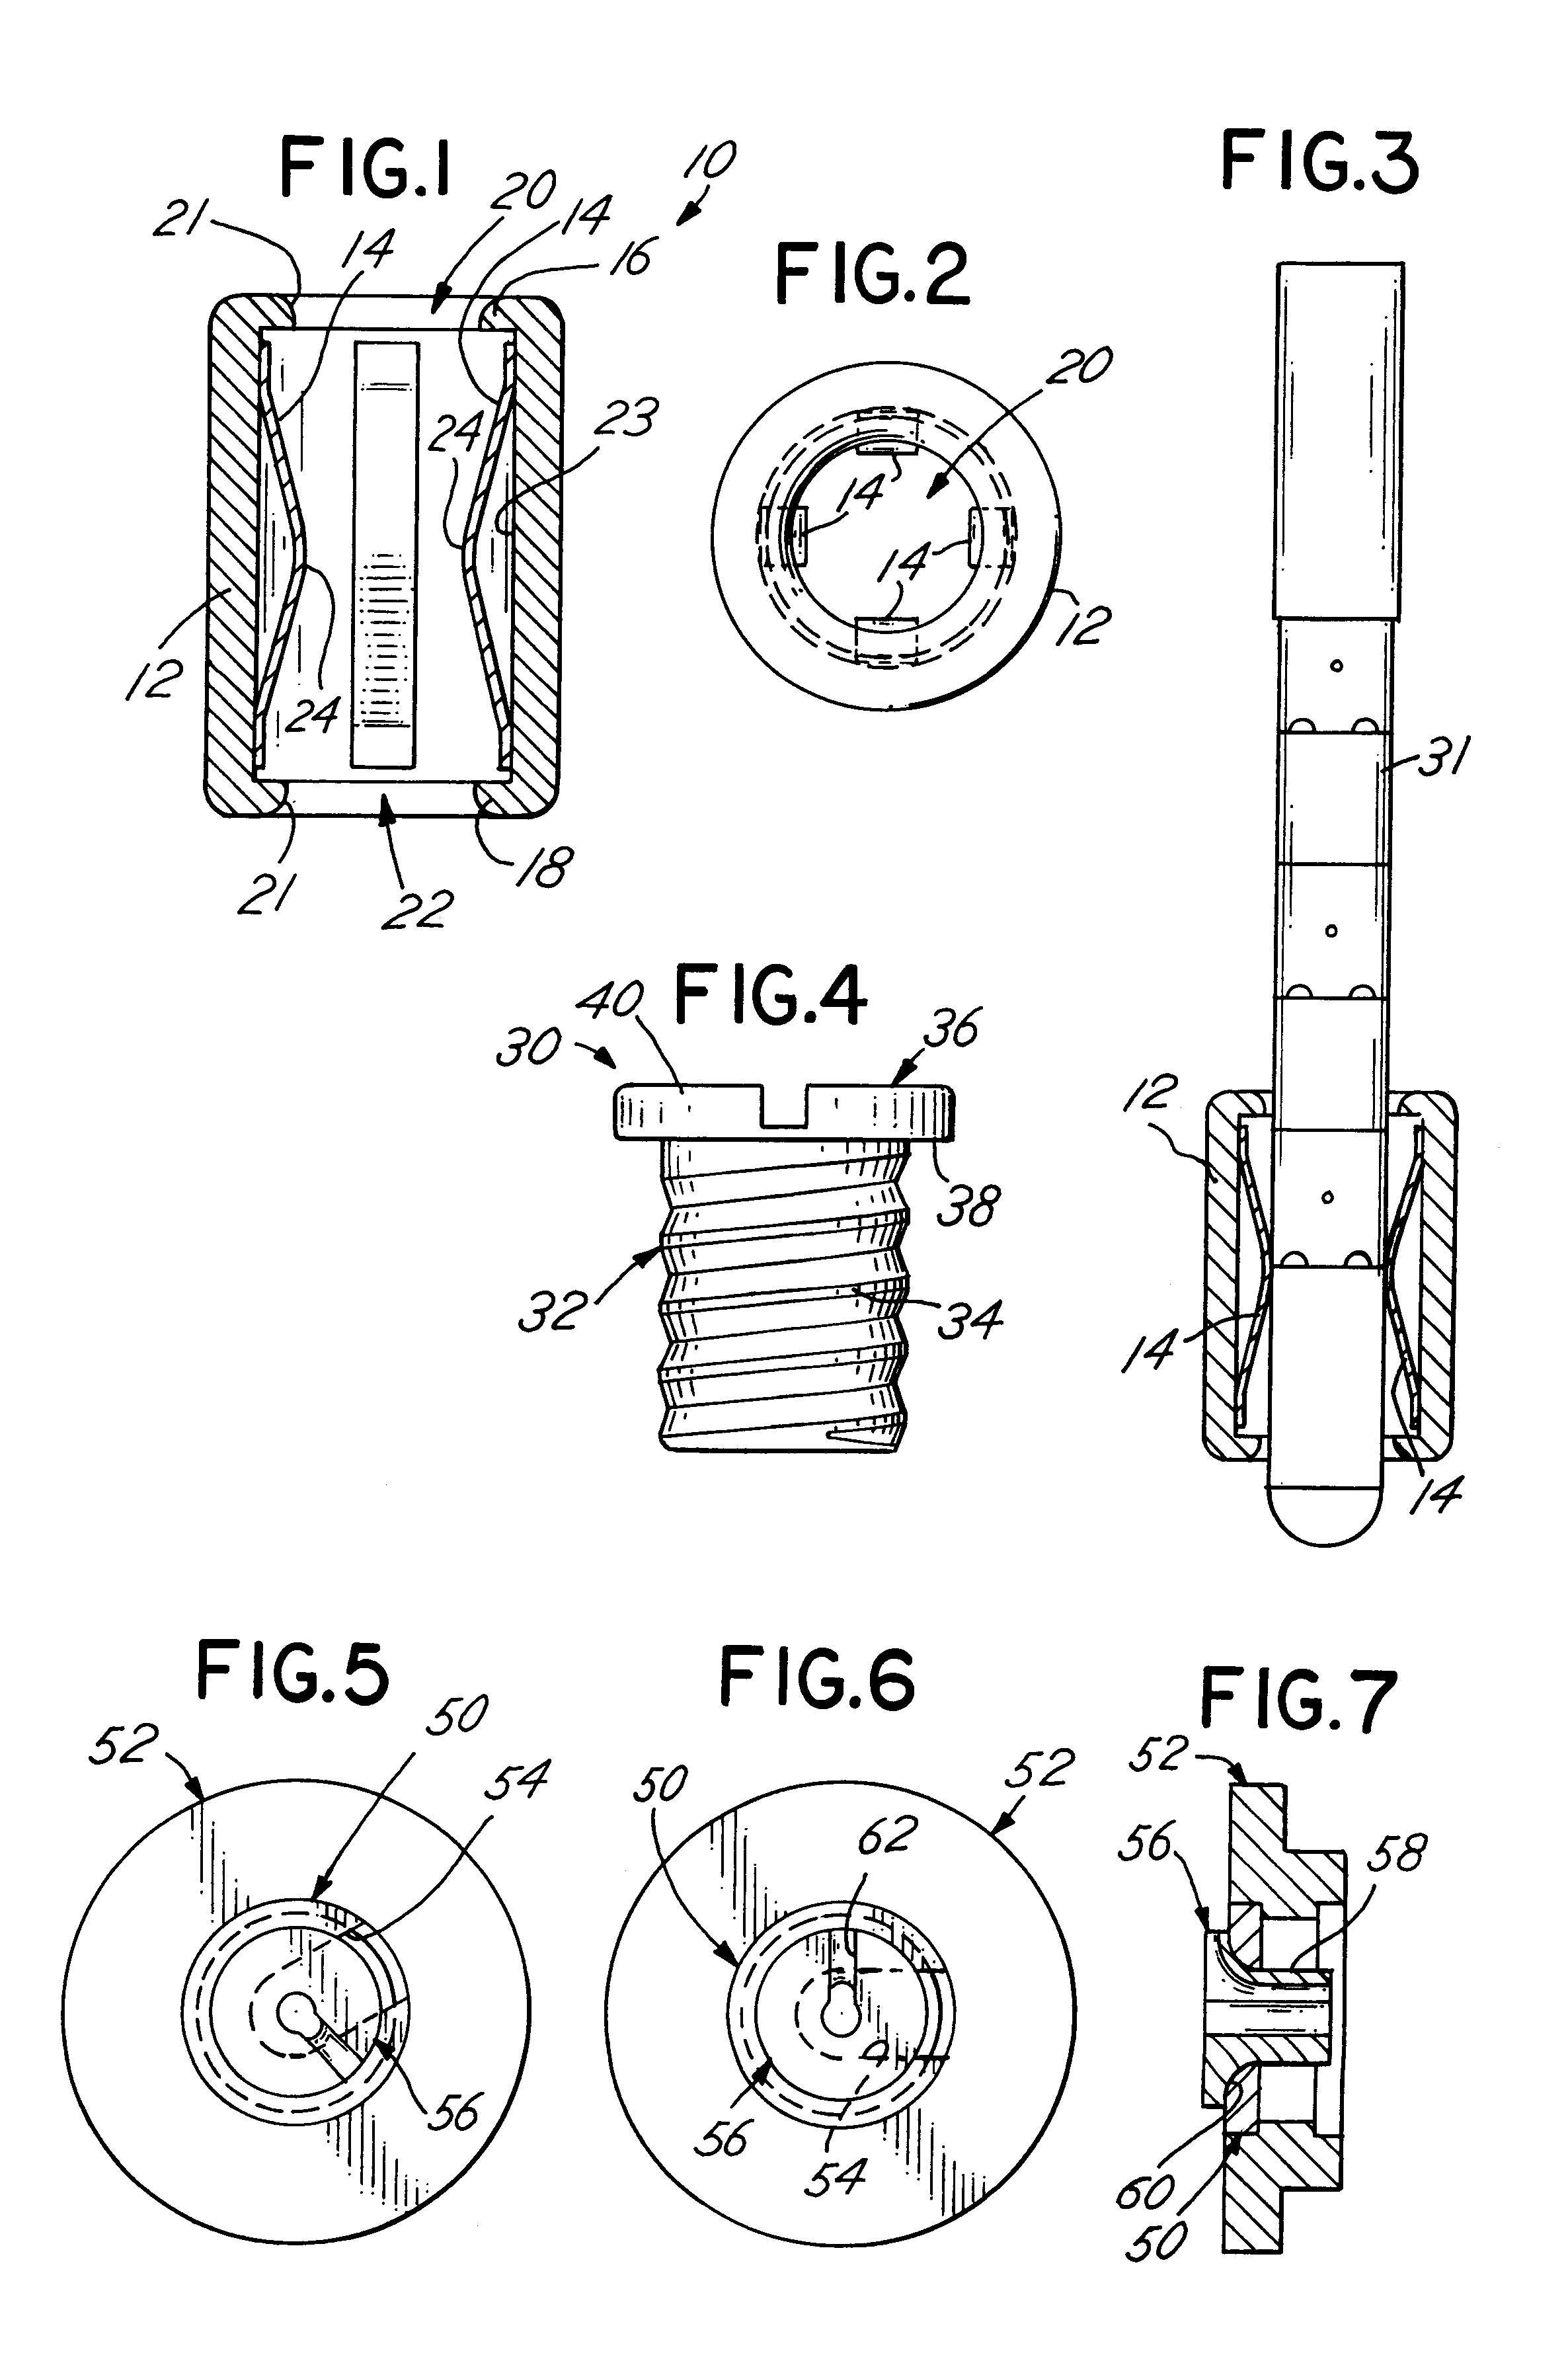 Medical lead positioning and anchoring system